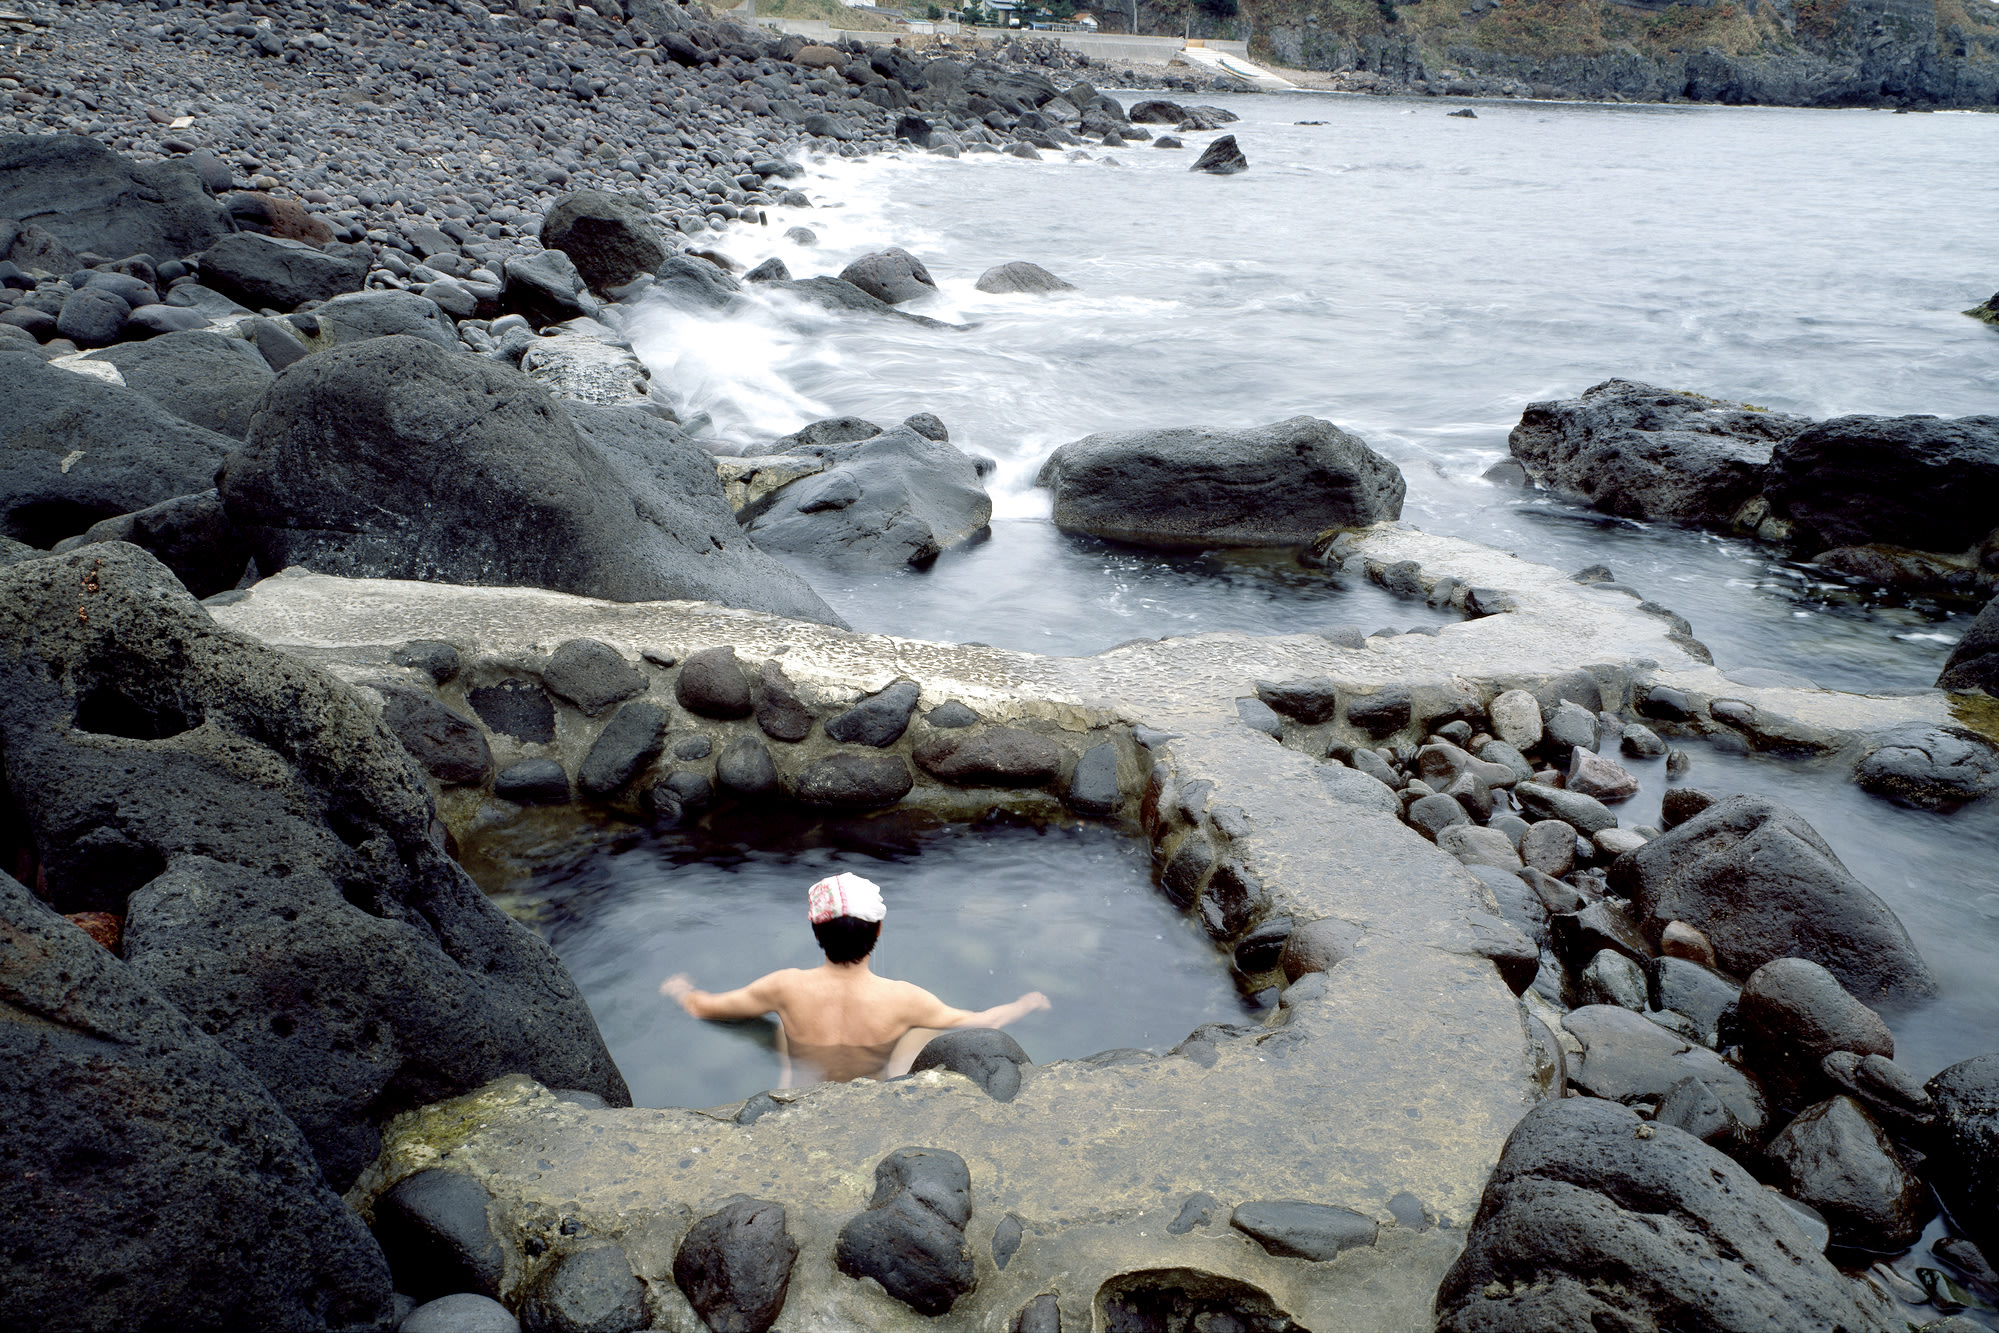 A man soaks in a small onsen hot-spring pool next to the sea. Waves can be seen crashing on the shore in the distance.